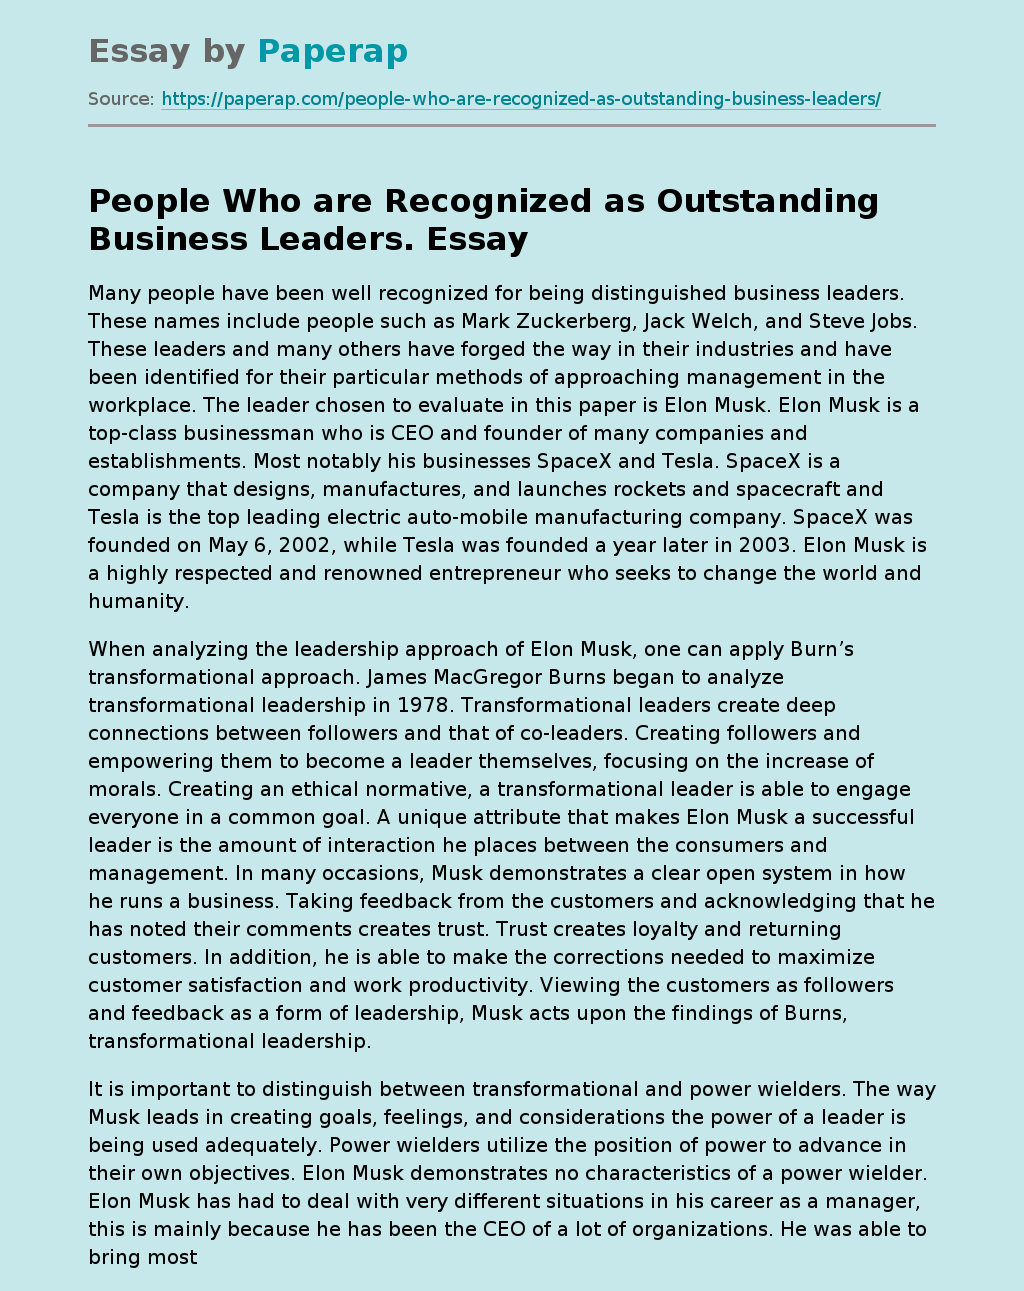 People Who are Recognized as Outstanding Business Leaders.